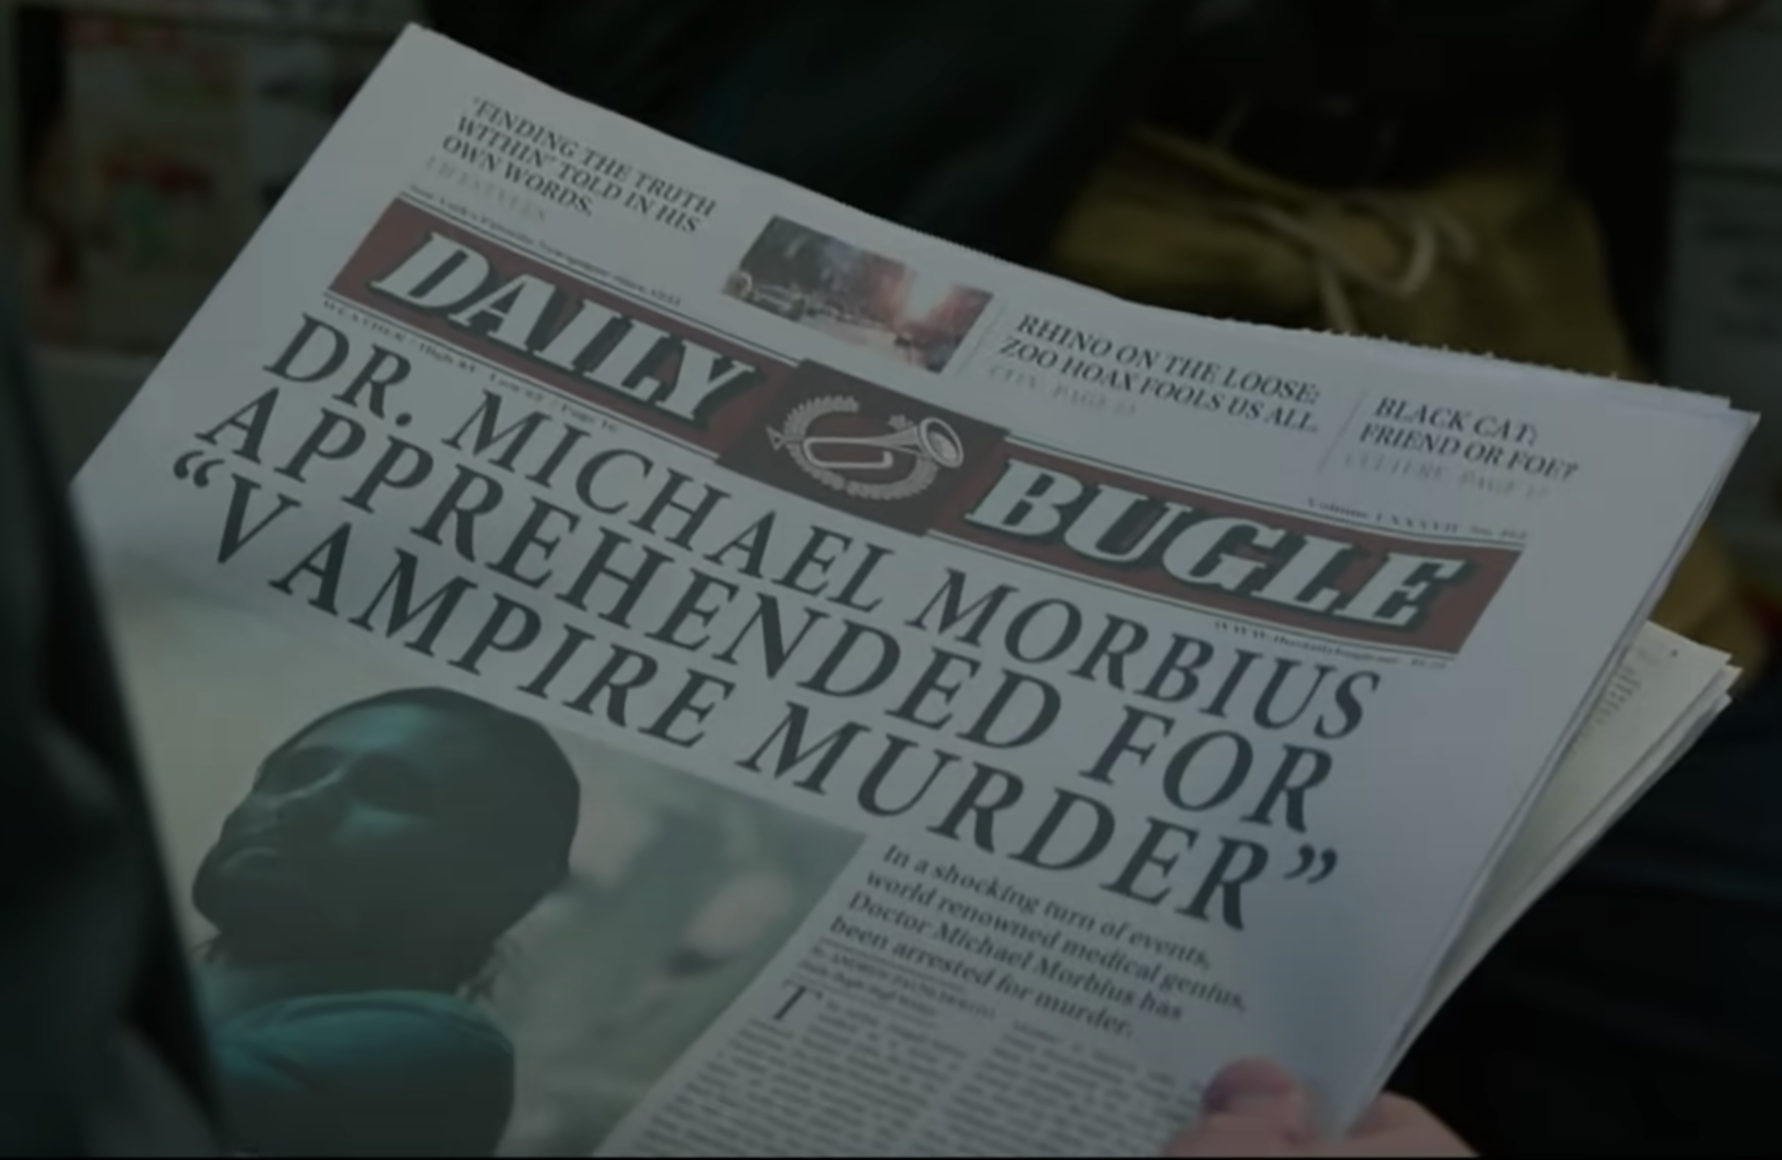 The Daily Bugle newspaper with &#x27;Dr Michael Morbius apprehended for &quot;Vampire Murder&quot; in all caps on the front, with a picture of Morbius on the left under the headline